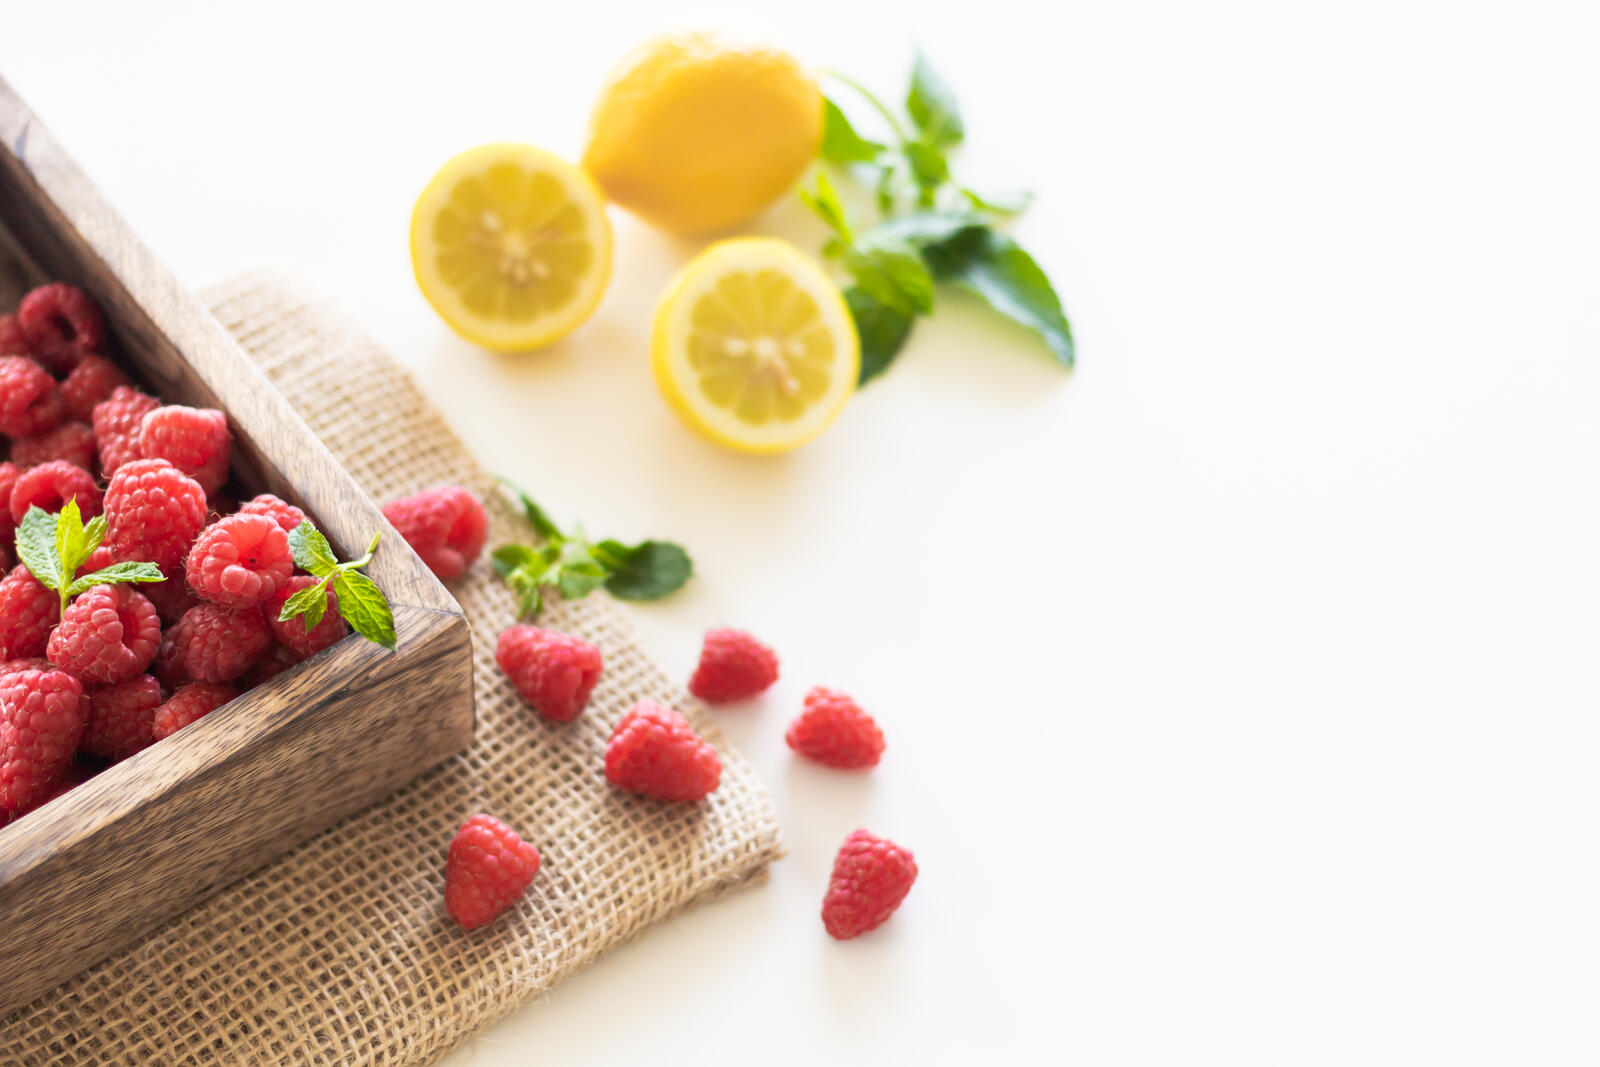 Free photo Scattered berries with lemon slices on a white tabletop